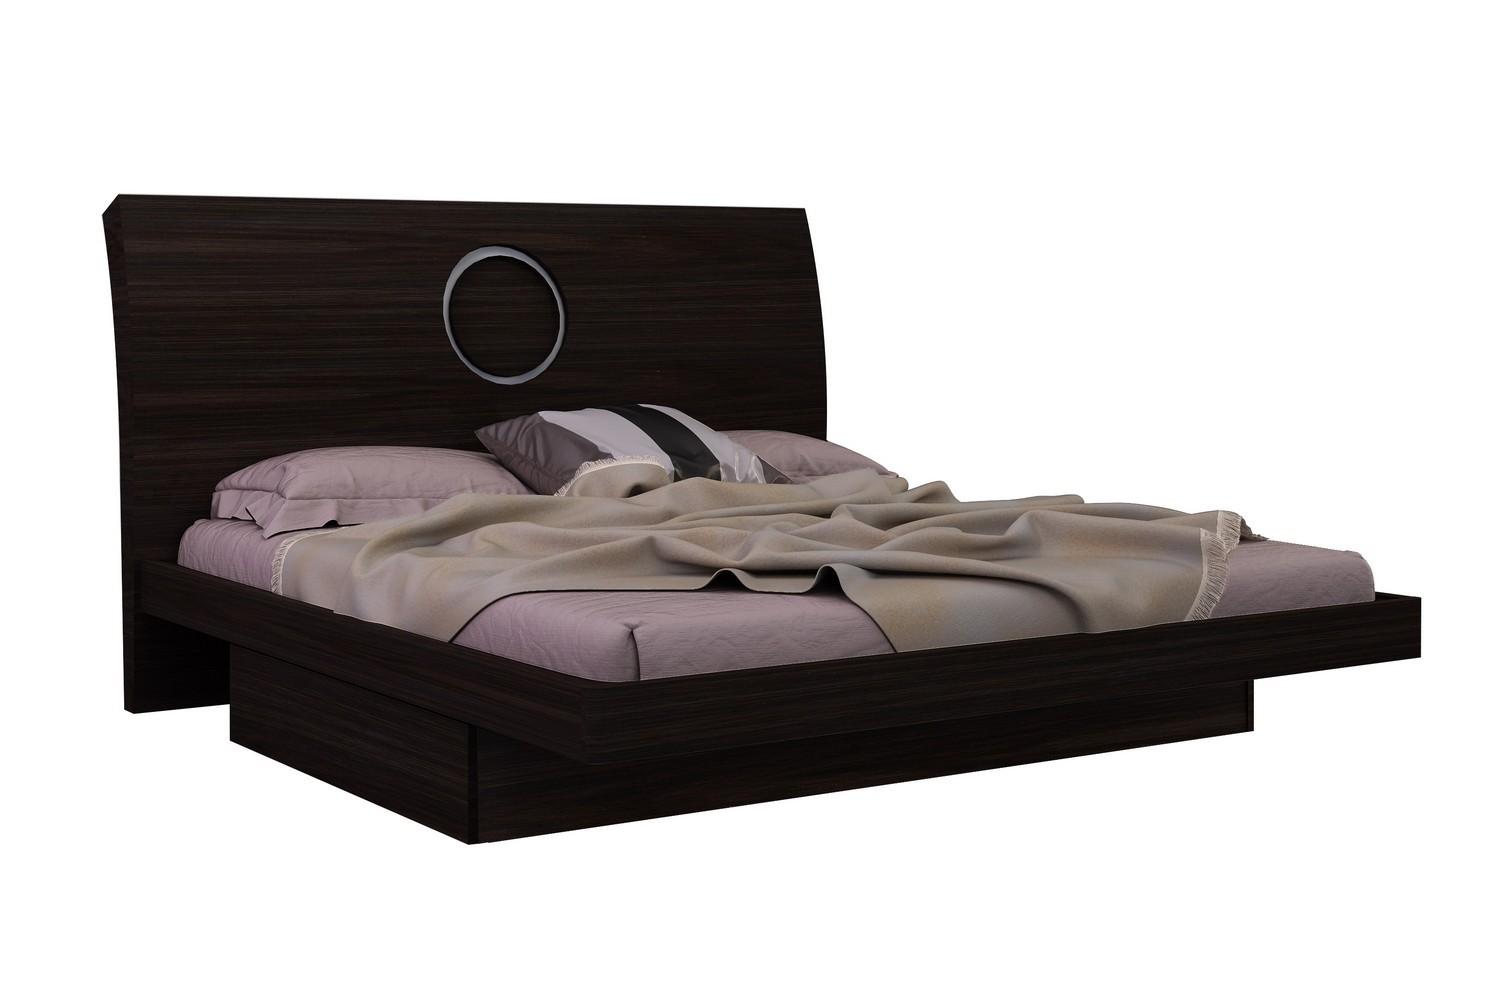 Contemporary, Modern Platform Bed Monte Carlo MONTE-BED-WENGE-EK in Wenge Lacquer